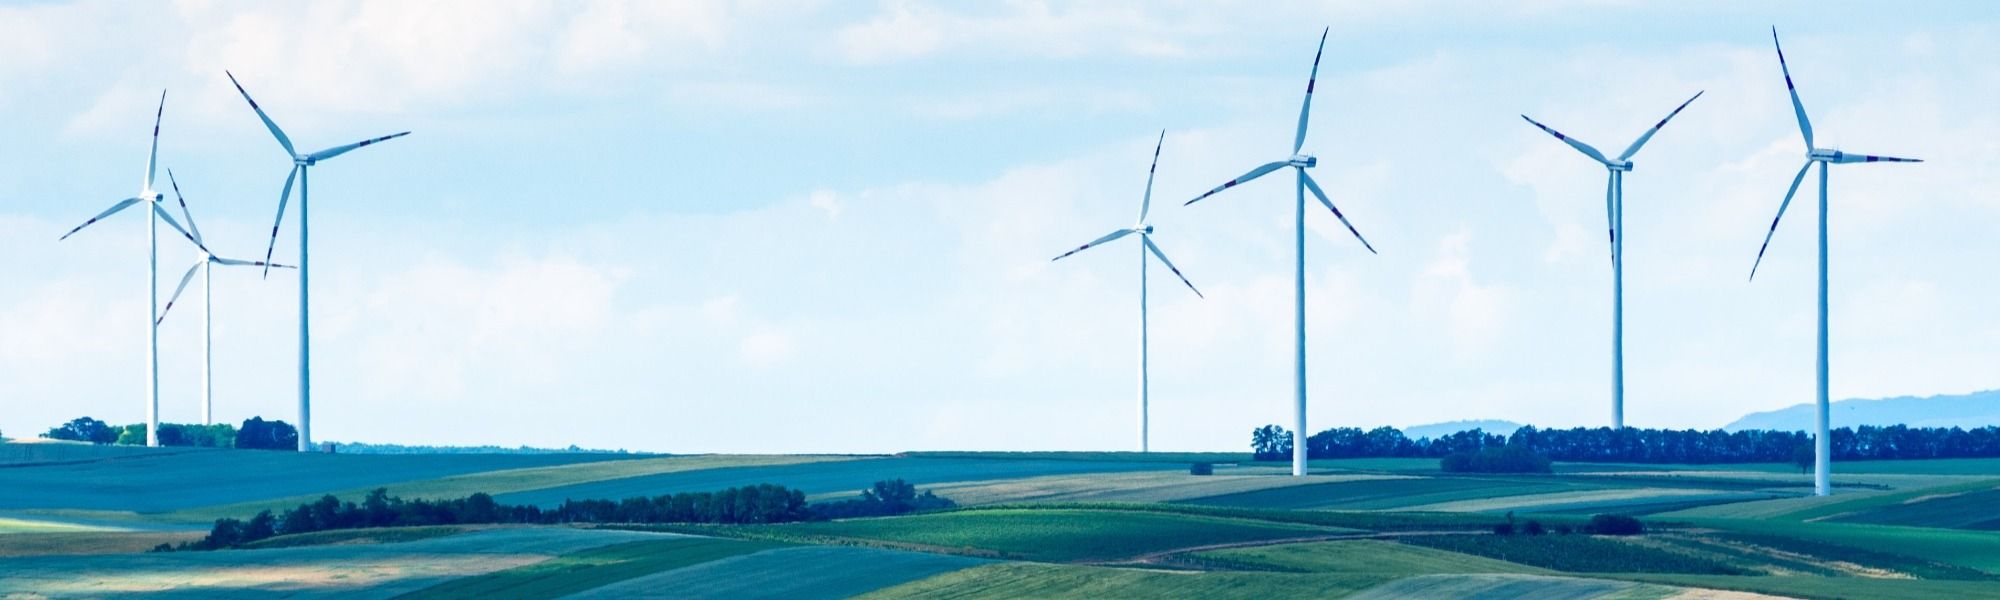 Picture of wind turbines in a field